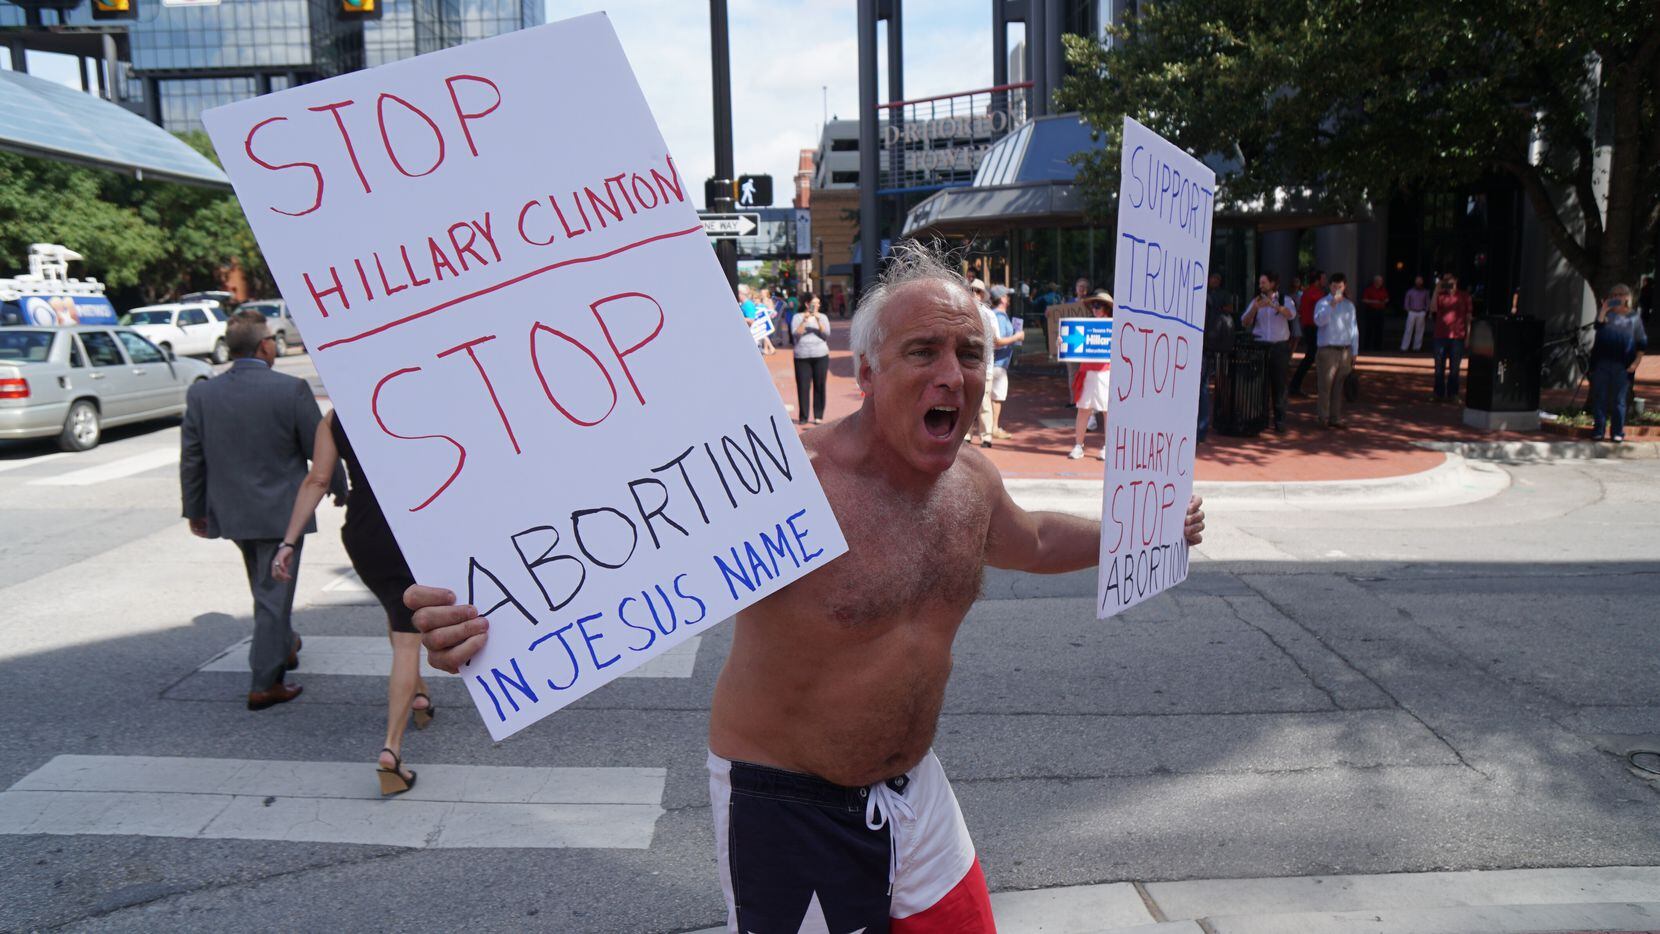 Donald Trump supporter Rives Grogan demonstrated outside a Republican fundraiser attended by...